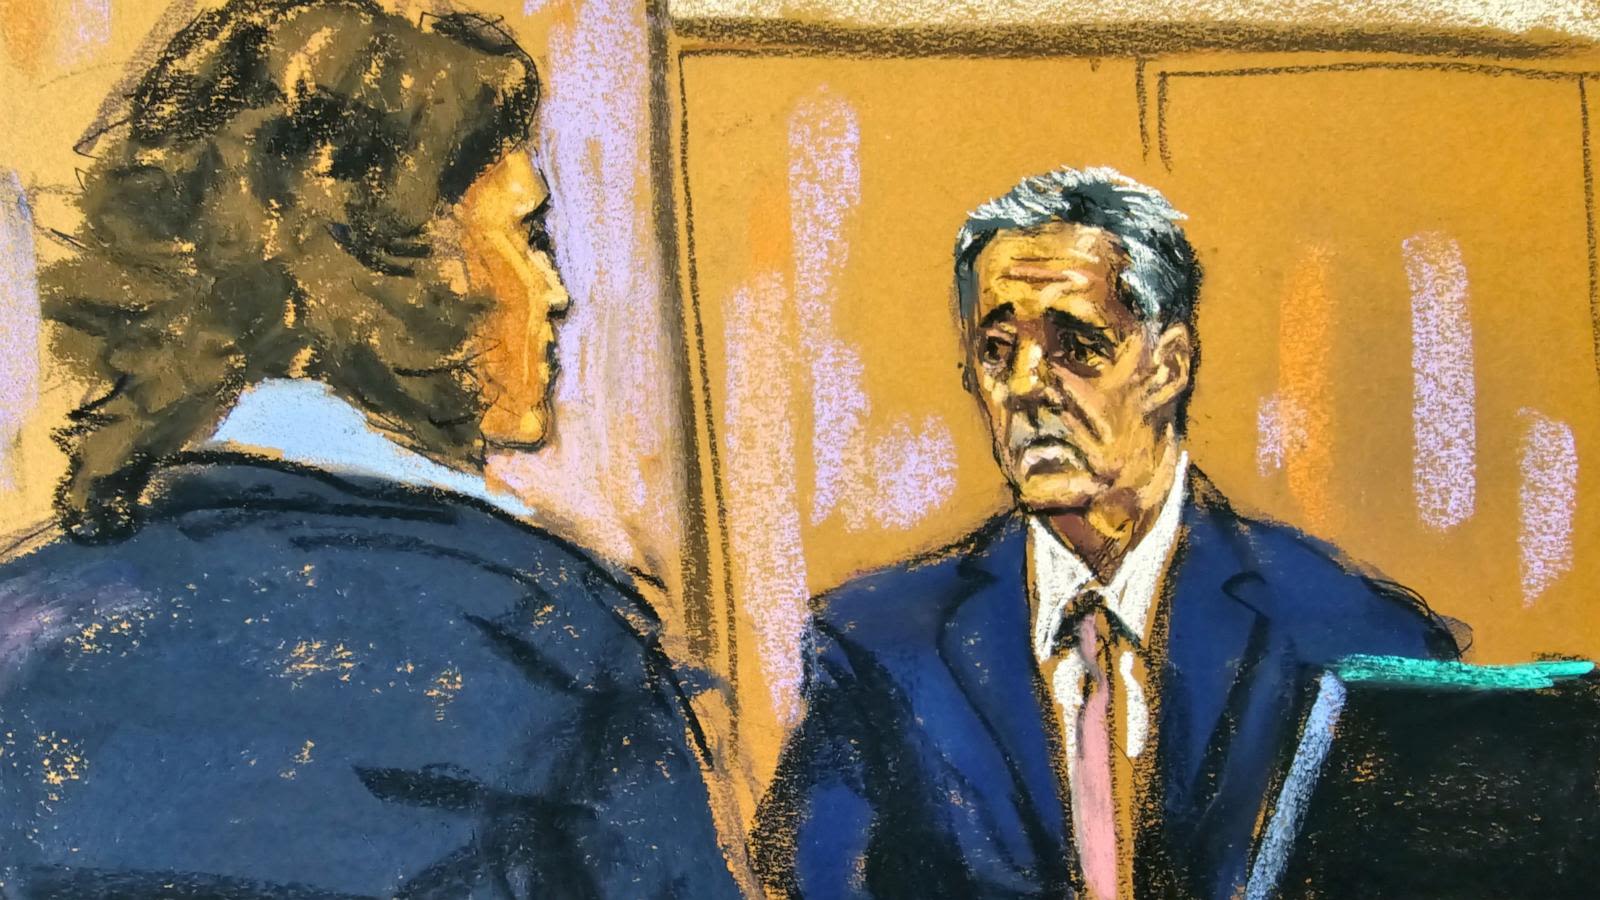 Trump trial live updates: Michael Cohen says Stormy Daniels story would have been 'catastrophic'